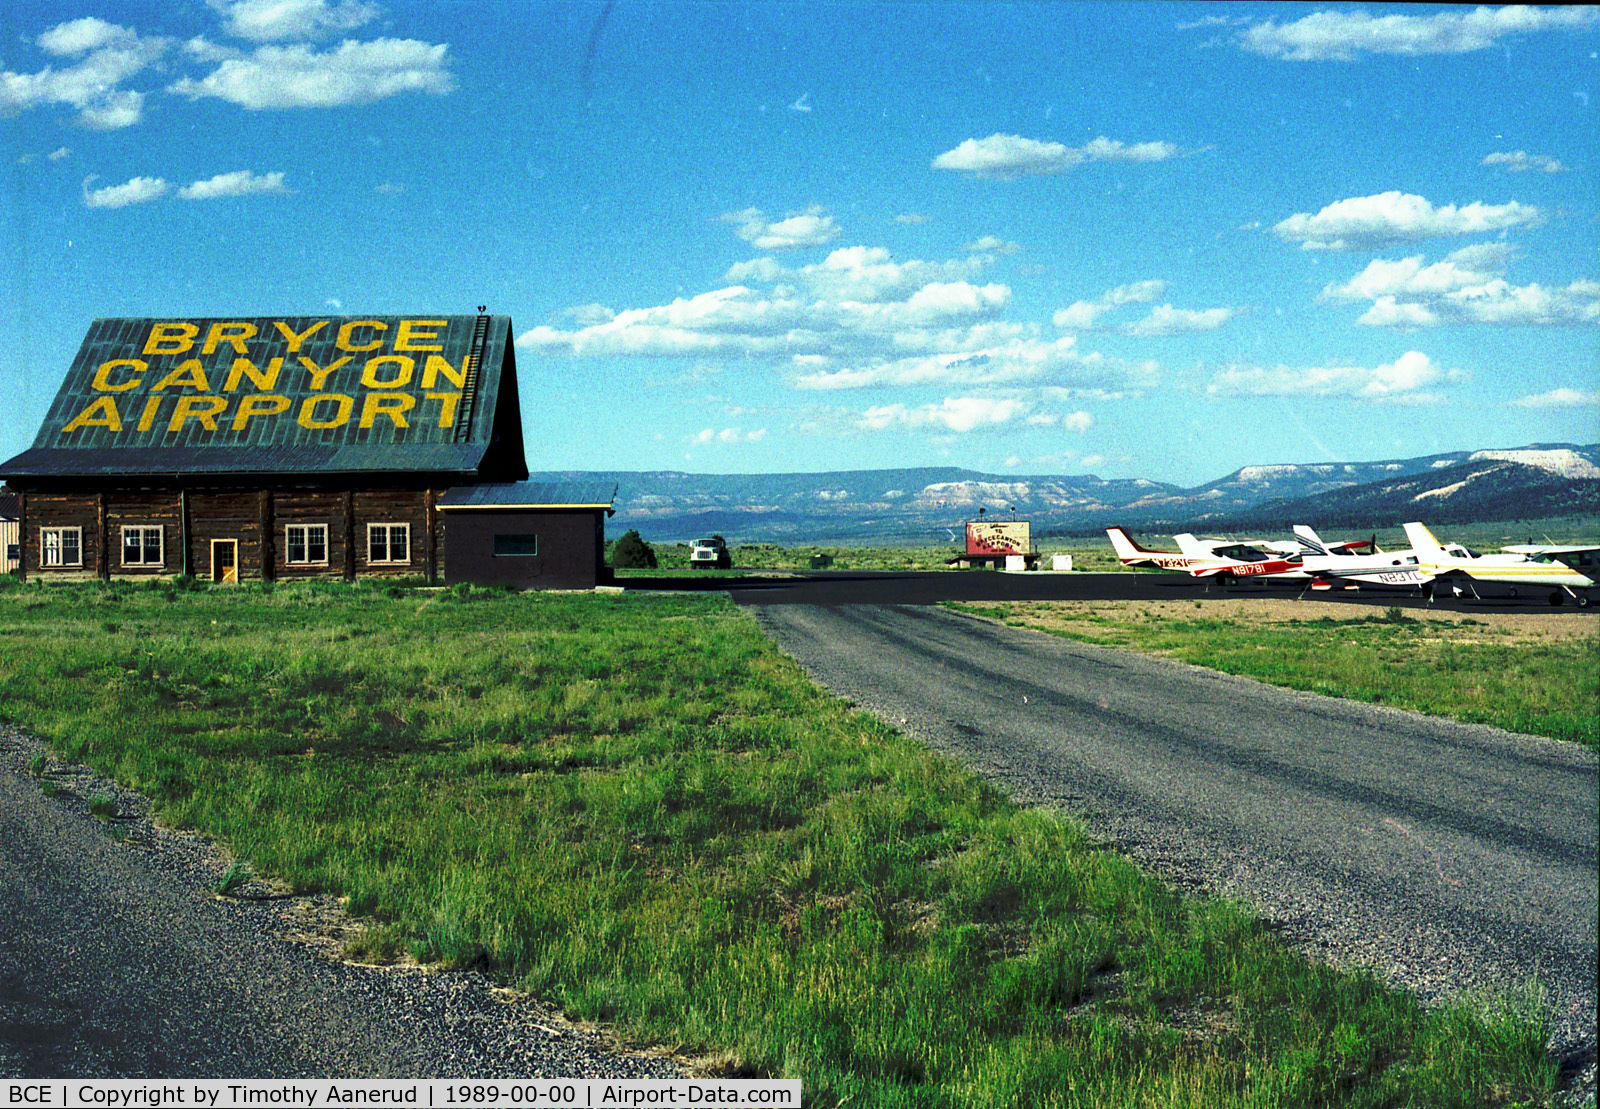 Bryce Canyon Airport (BCE) - Log cabin style hangar built by the Works Progess Administration (WPA) in the 1930's